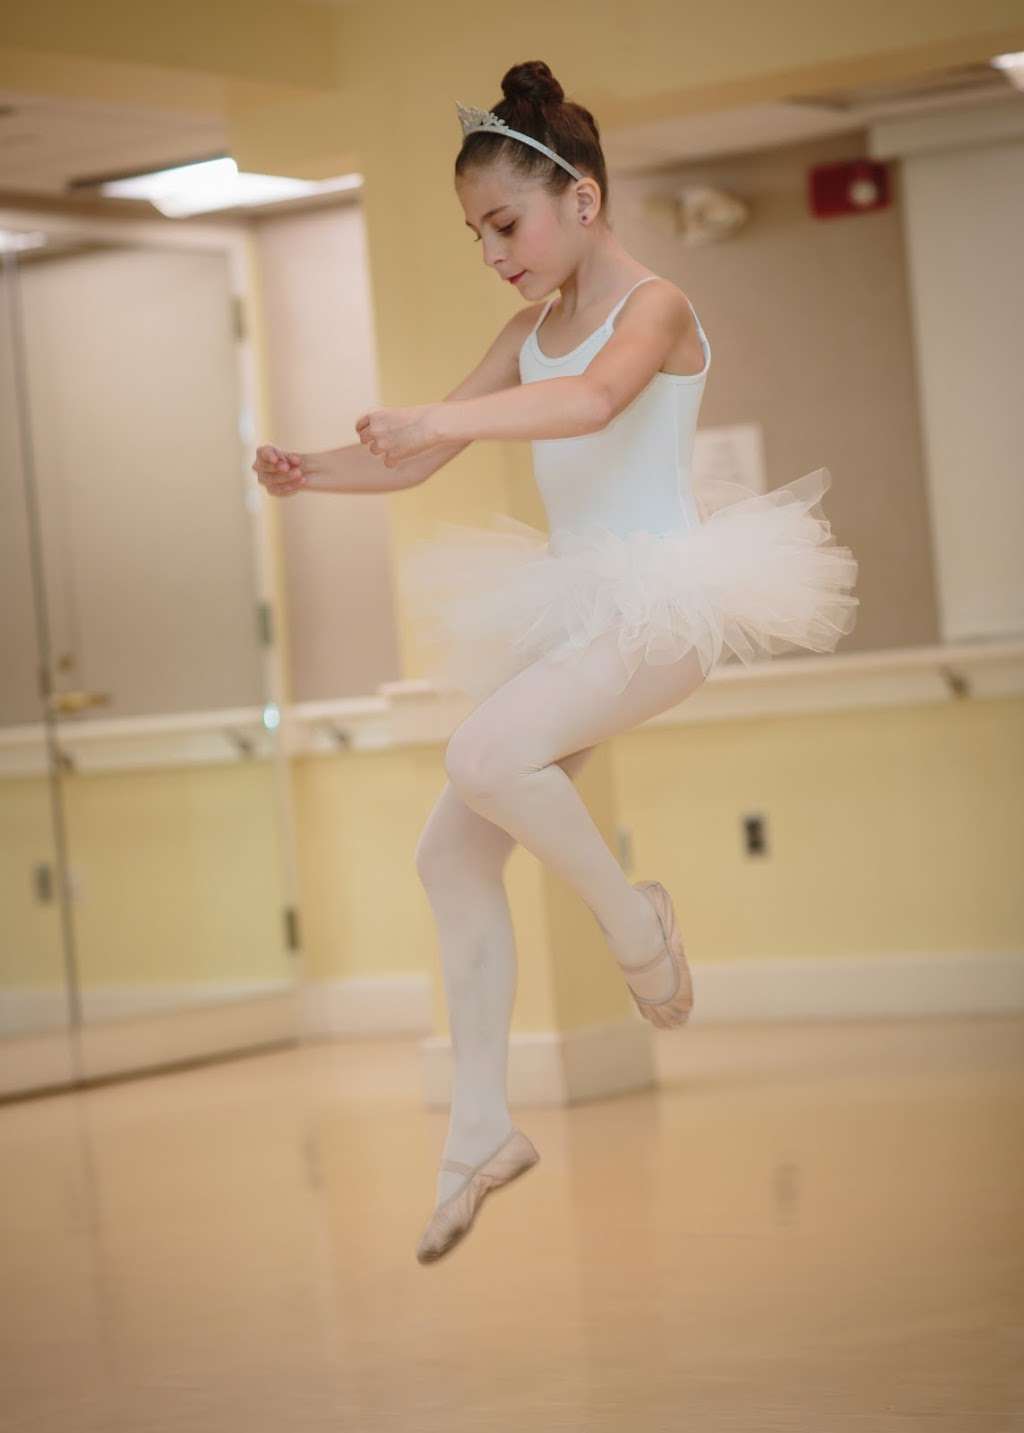 Ballet Classic | 12 Mudge Way, Bedford, MA 01730 | Phone: (978) 886-8289